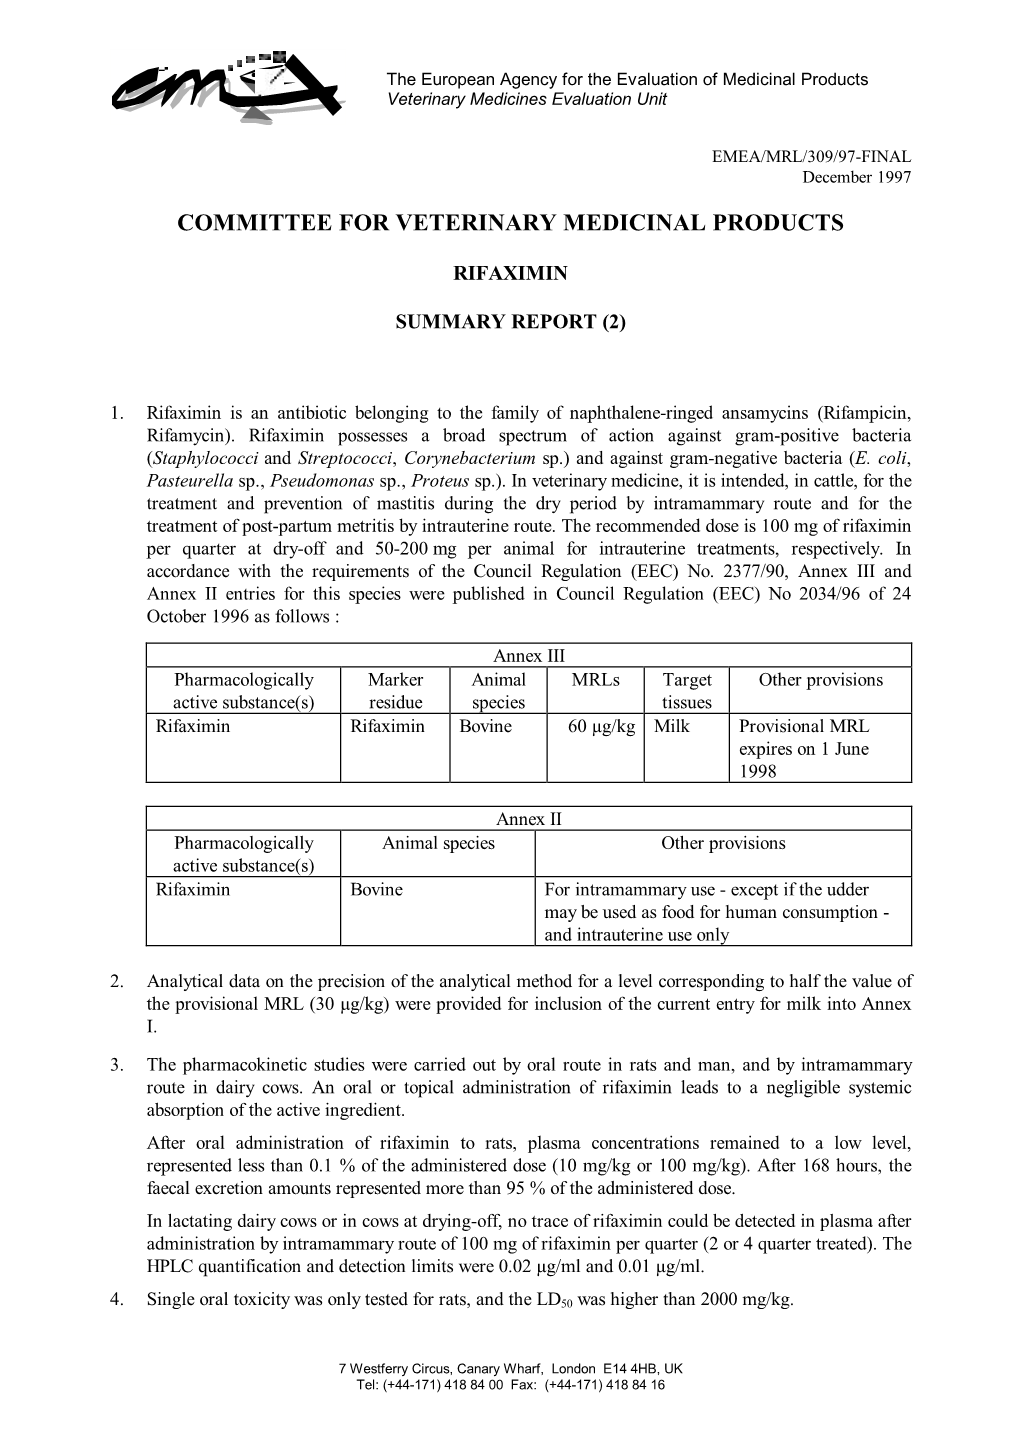 Rifaximin-Summary-Report-2-Committee-Veterinary-Medicinal-Products En.Pdf